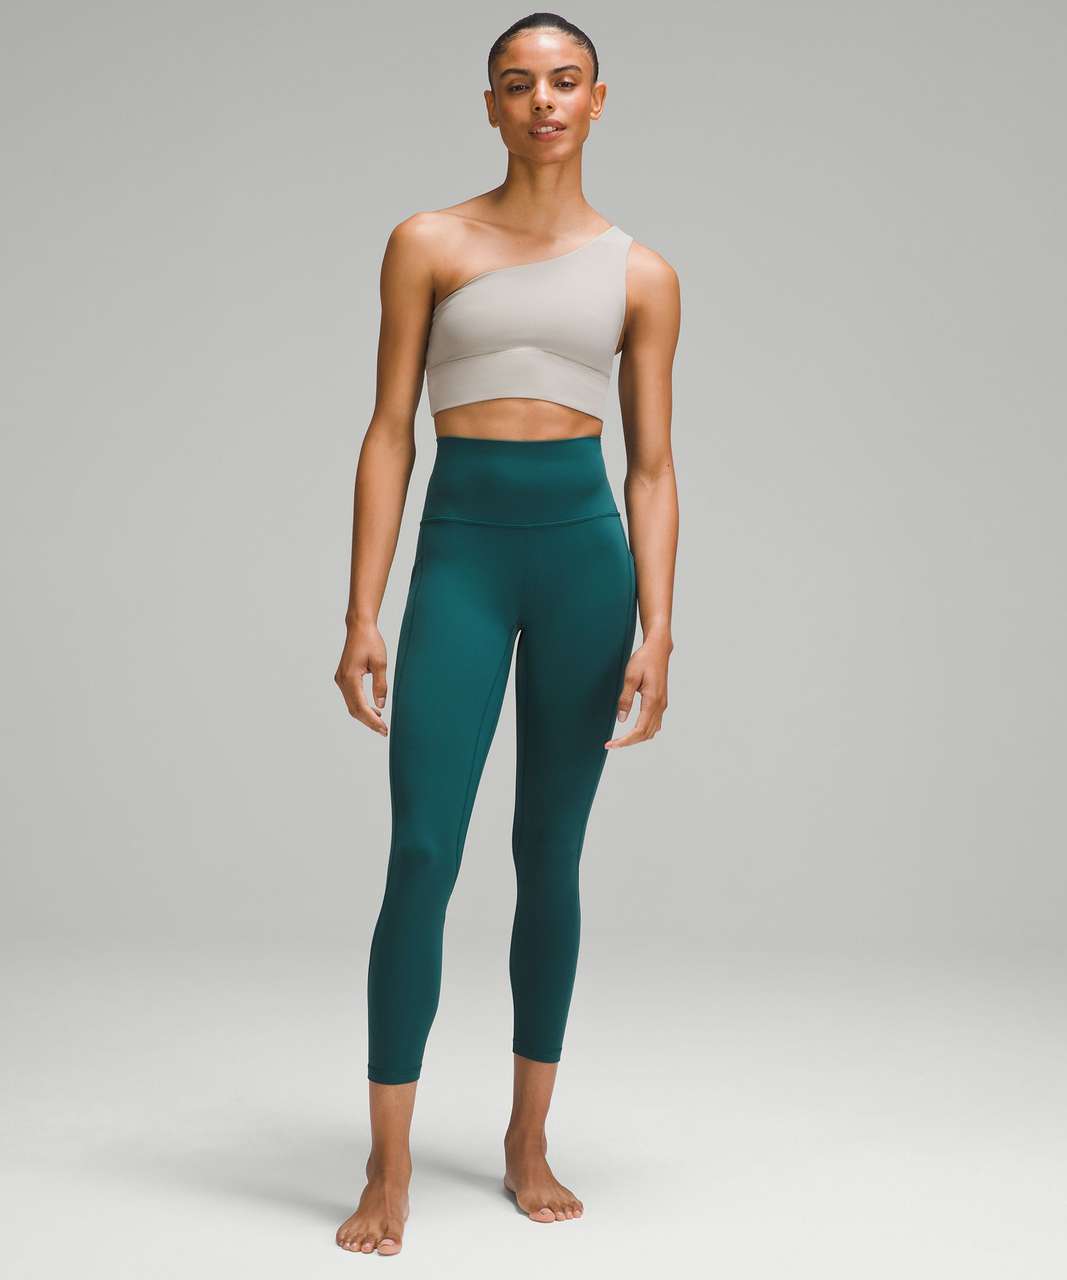 Track lululemon Align™ High-Rise Pant with Pockets 25 - Storm Teal 